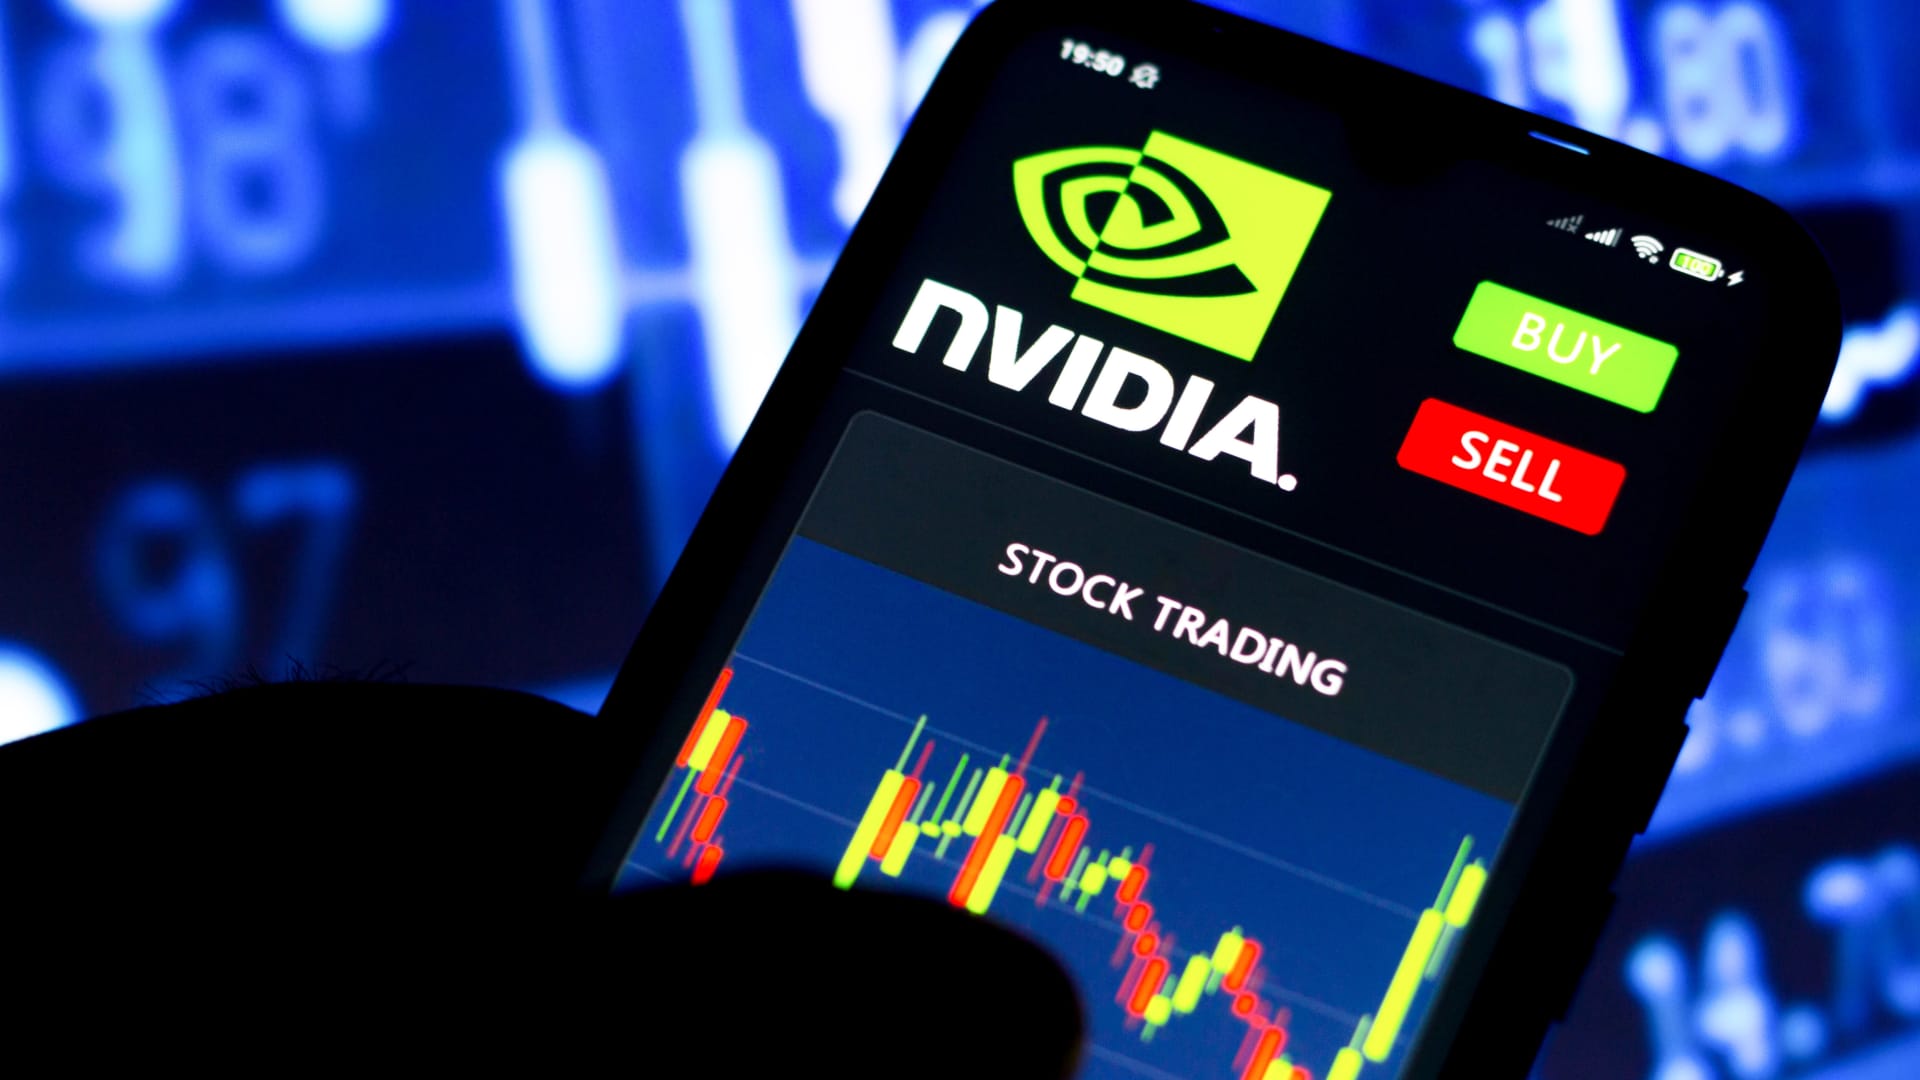 Analysts are bullish on Nvidia again after it unveils new products – CNBC